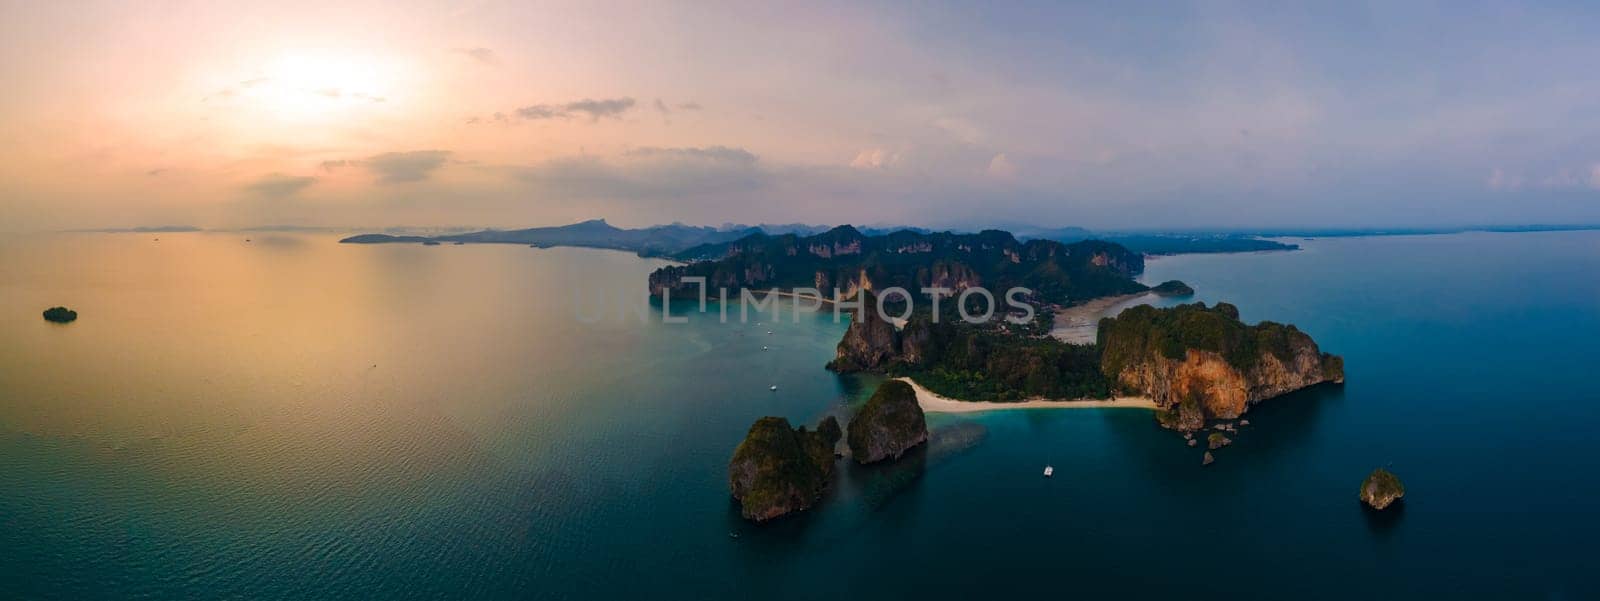 Railay Beach Krabi Thailand, the tropical beach of Railay Krabi, view from a drone of idyllic Railay Beach in Thailand in the evening at sunset with a cloudy sky. Panorama of Railay Beach